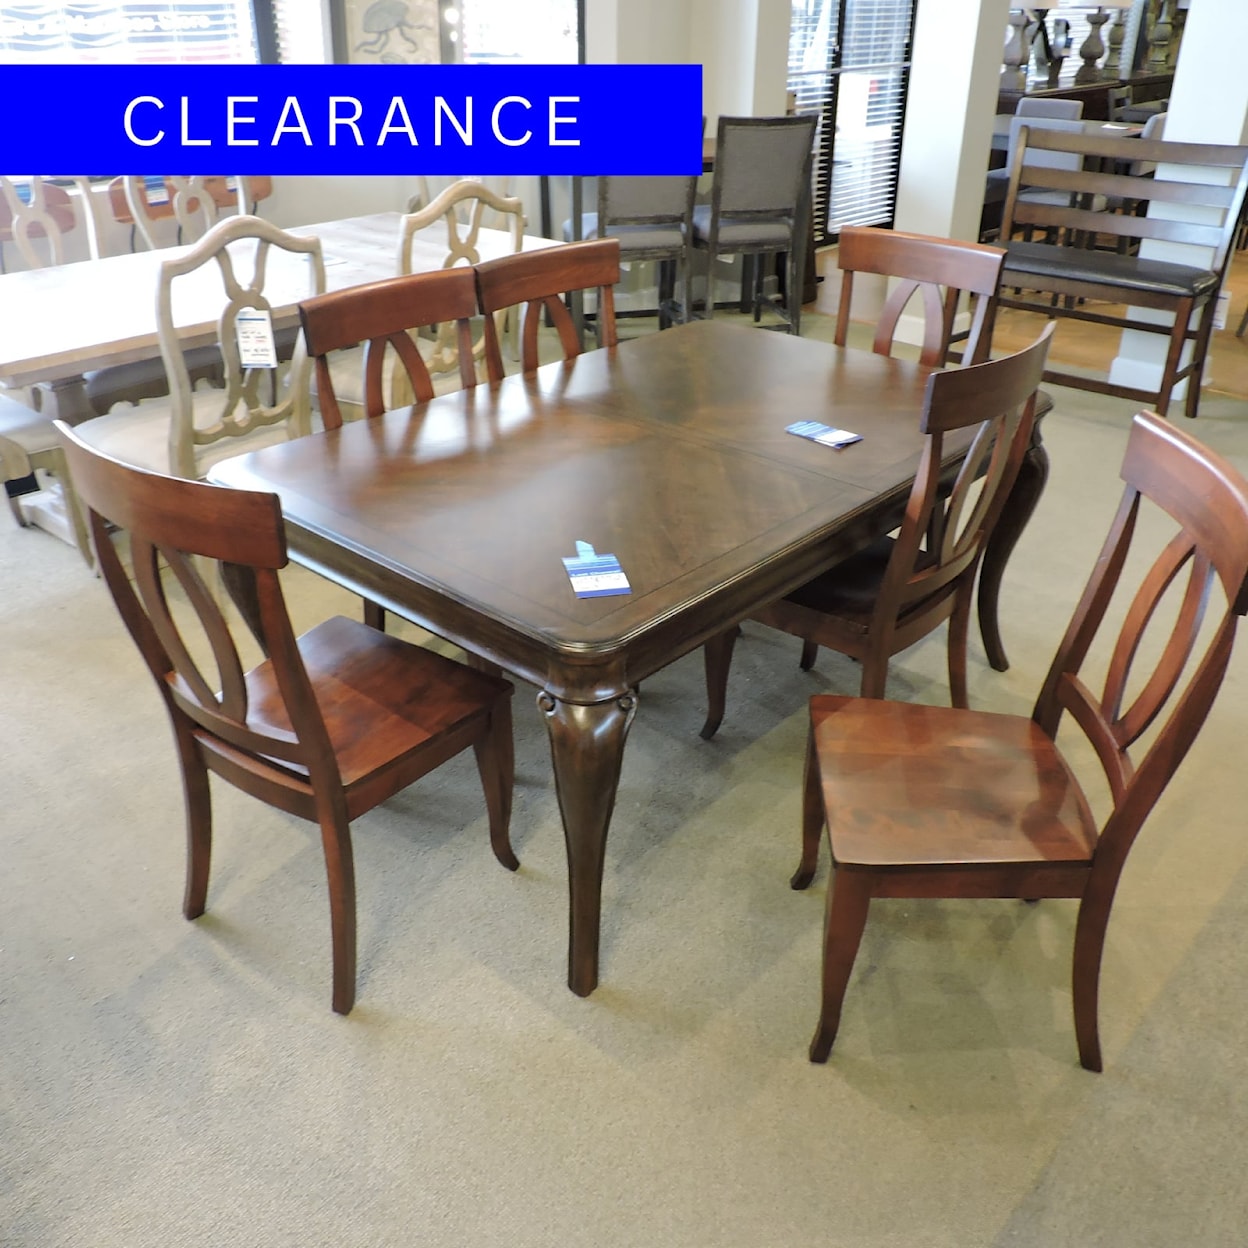 Miscellaneous Clearance Set of 6 Dining Chairs